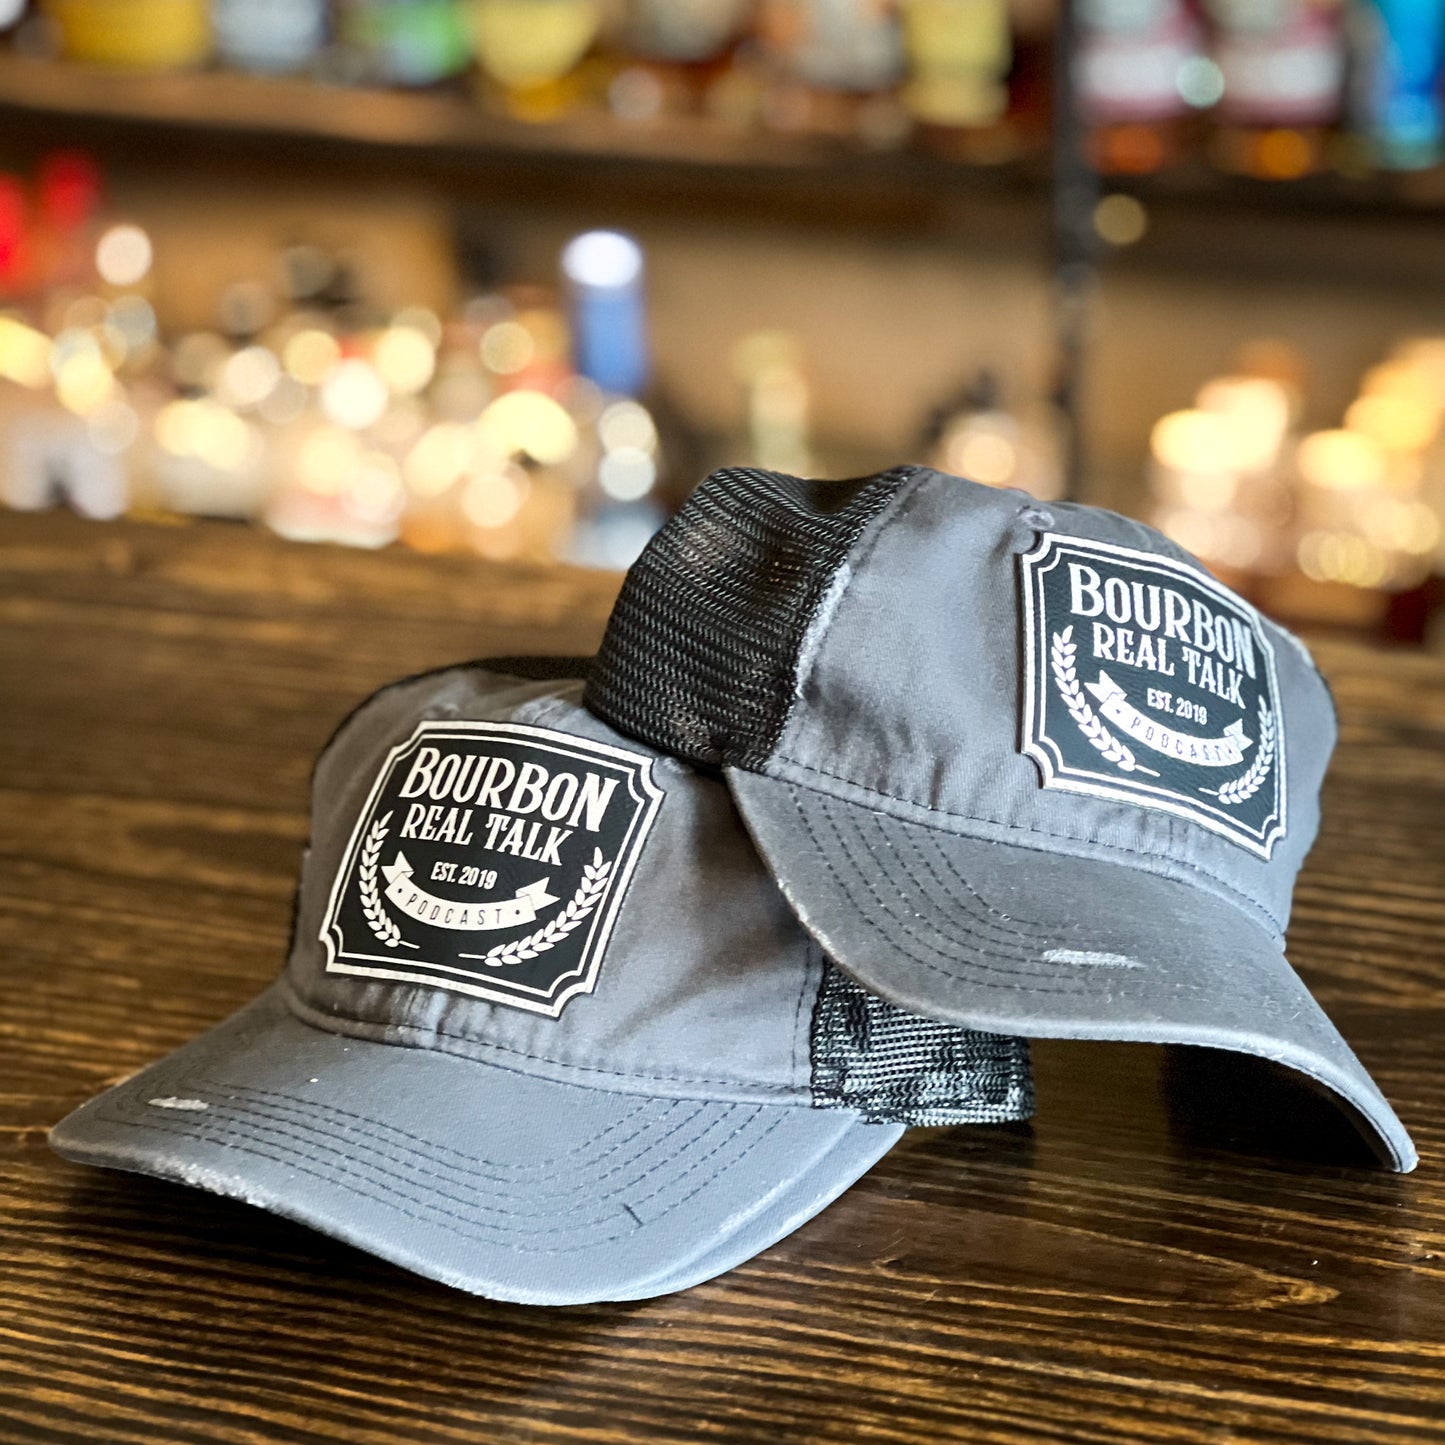 Distressed Unstructured Trucker Hat with leather patch, photo  has two hats on wooden counter top with whiskey bottles  in the background